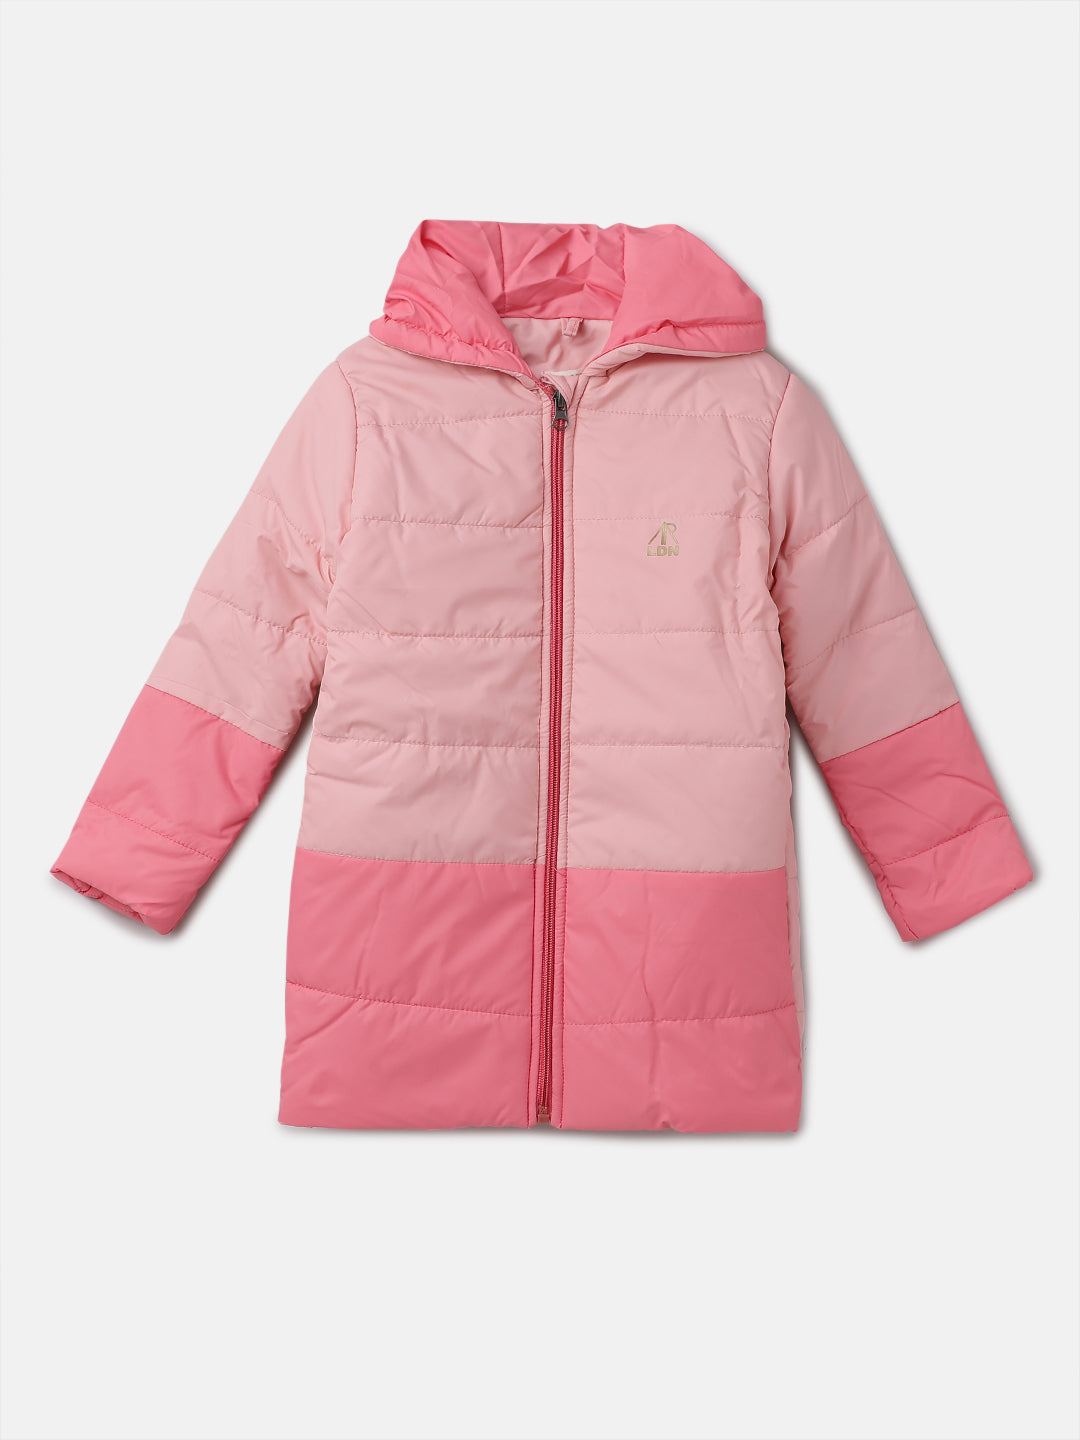 Girls Pink Colour Blocked Puffa Jacket with Hood